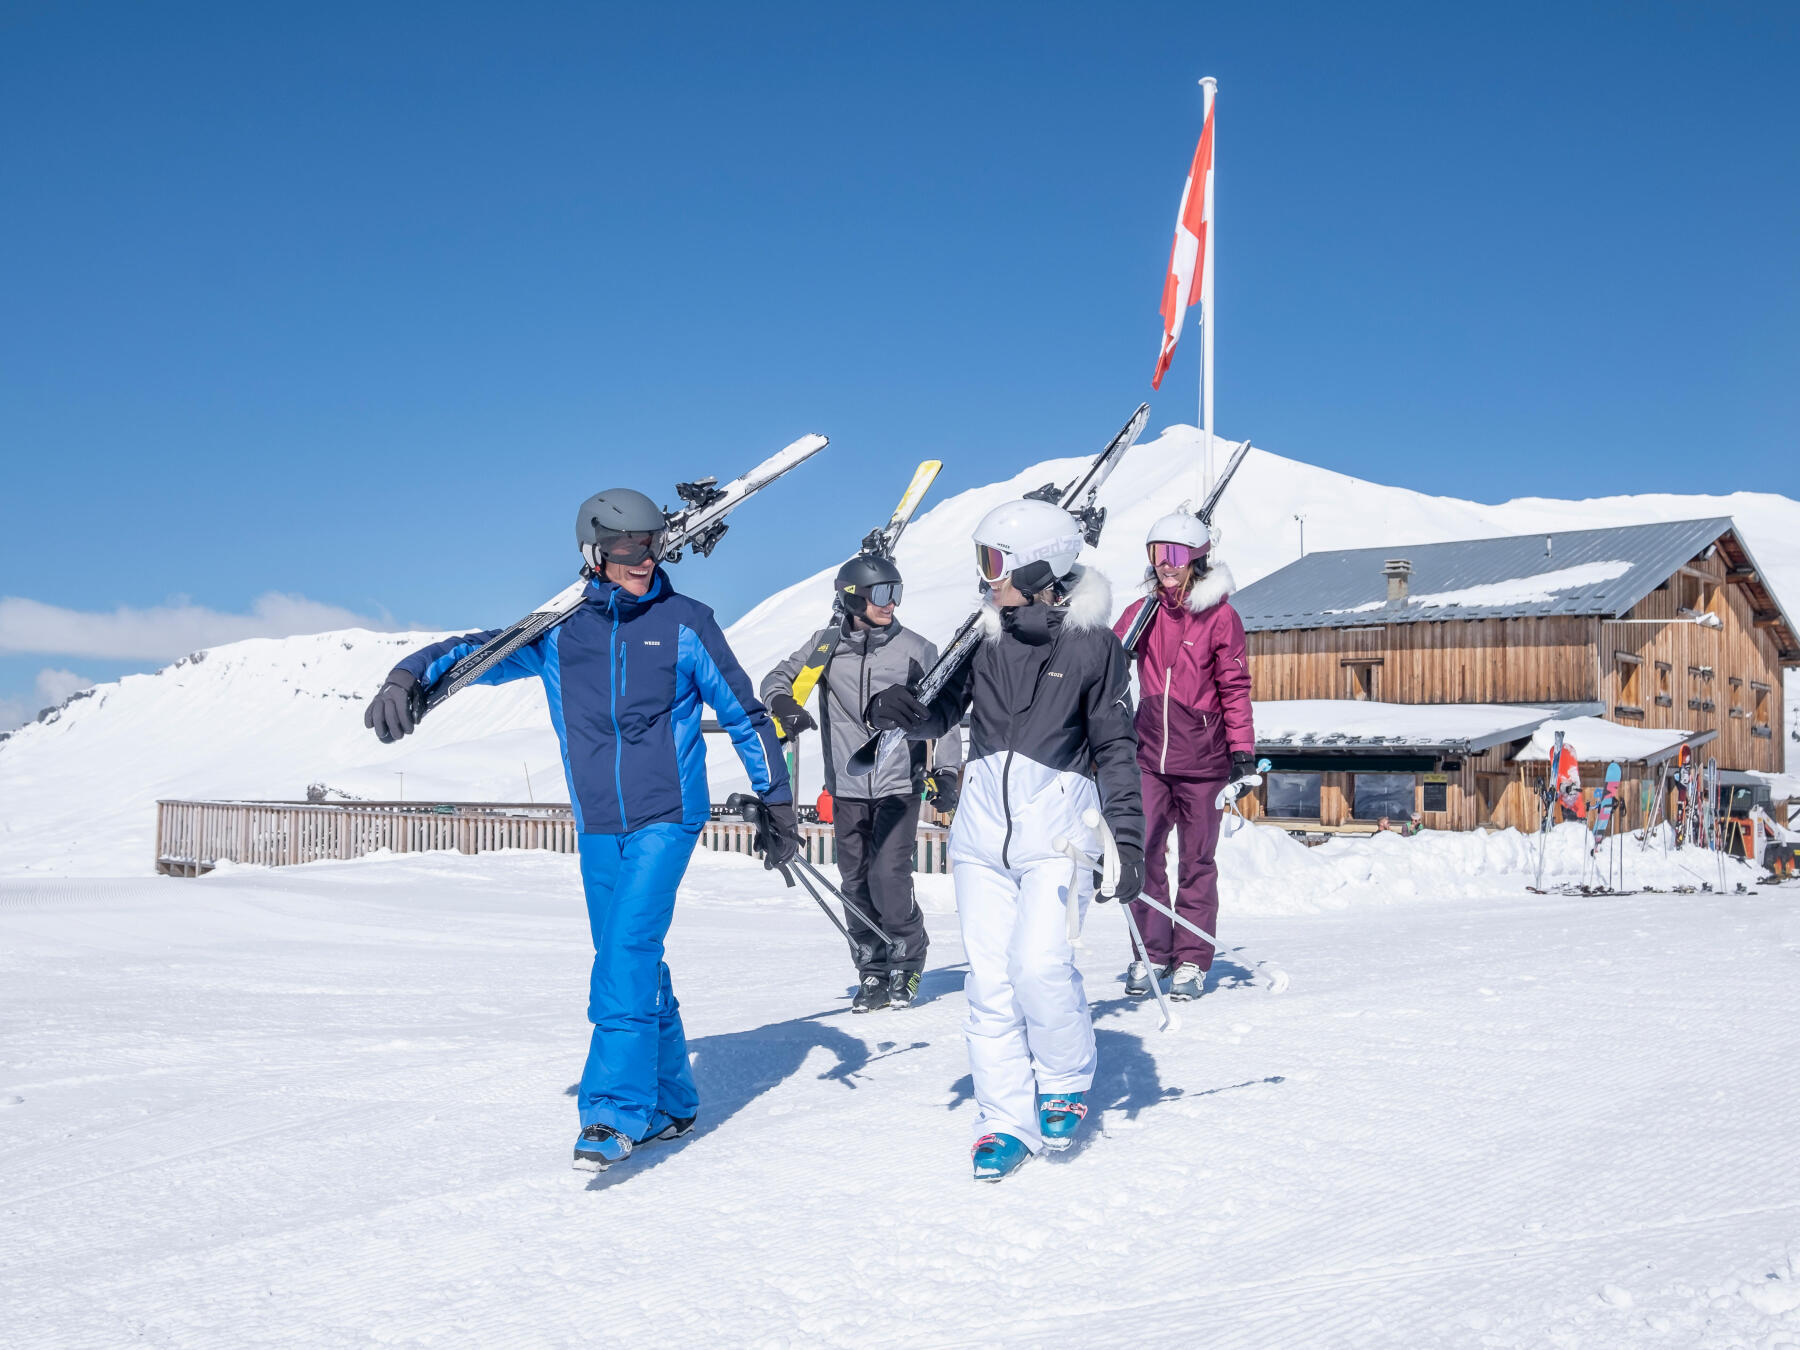 Winter sports: how to choose your ski resort